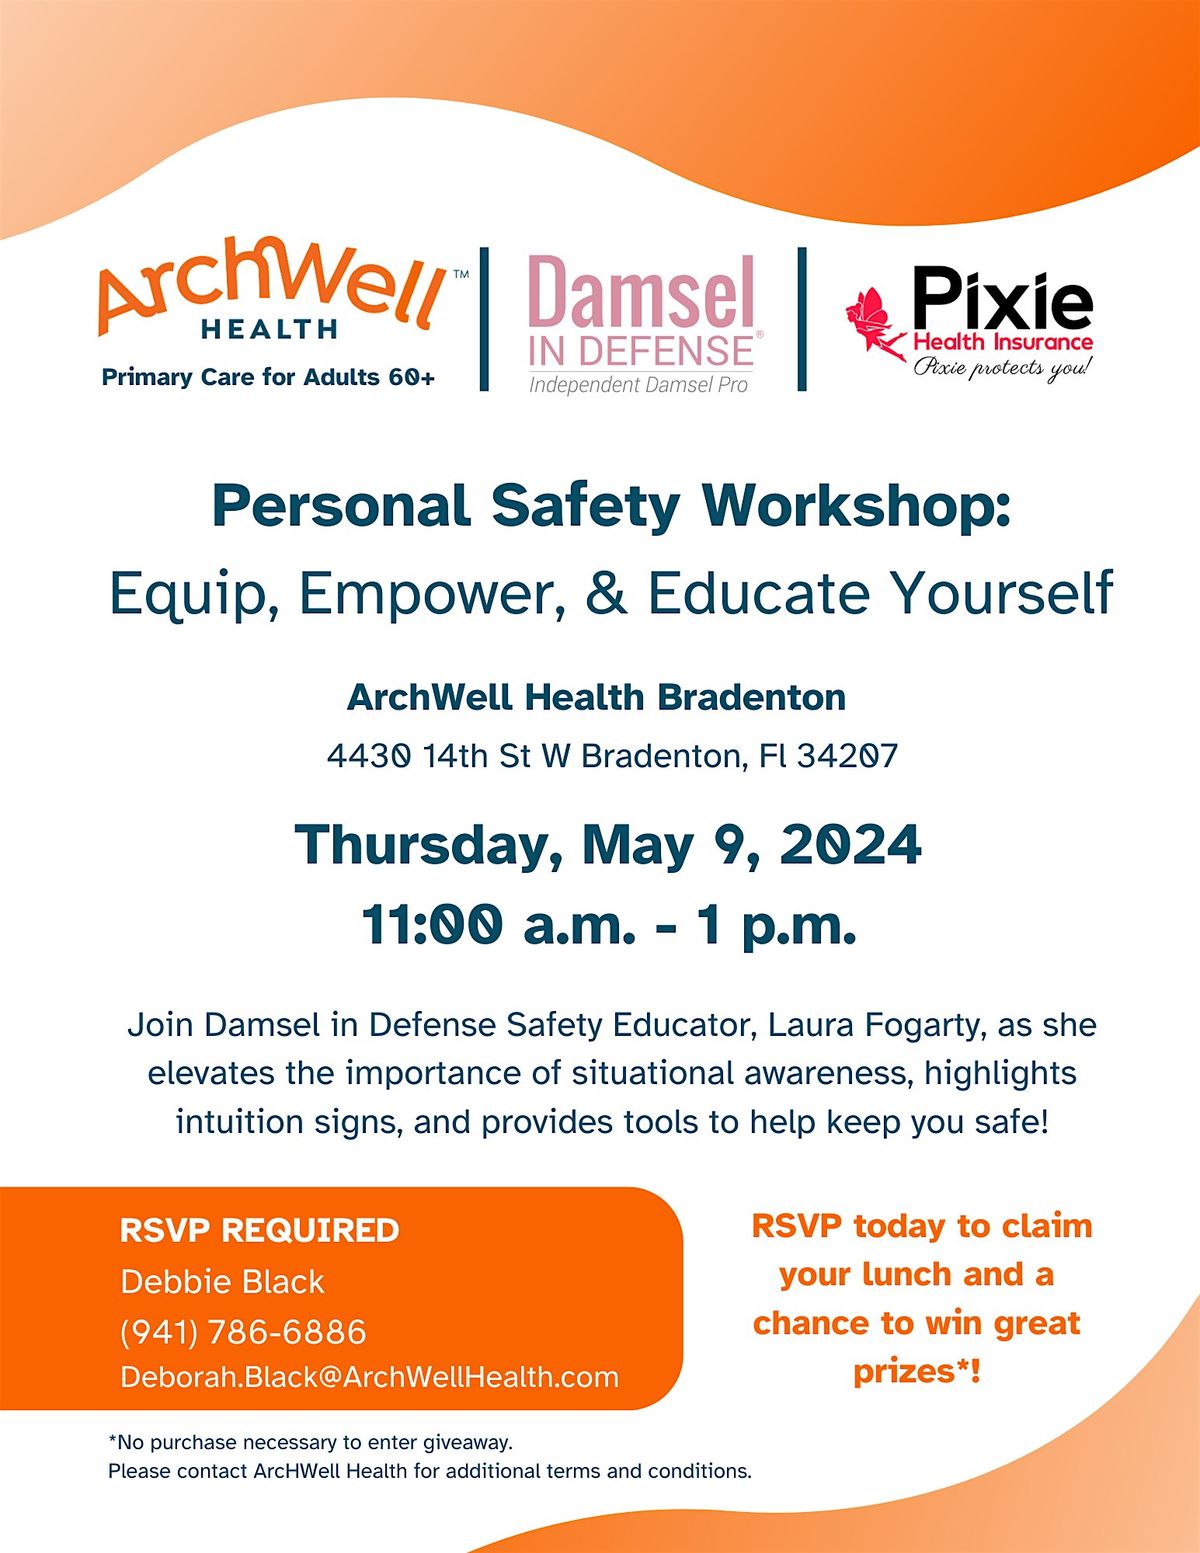 Personal Safety Workshop